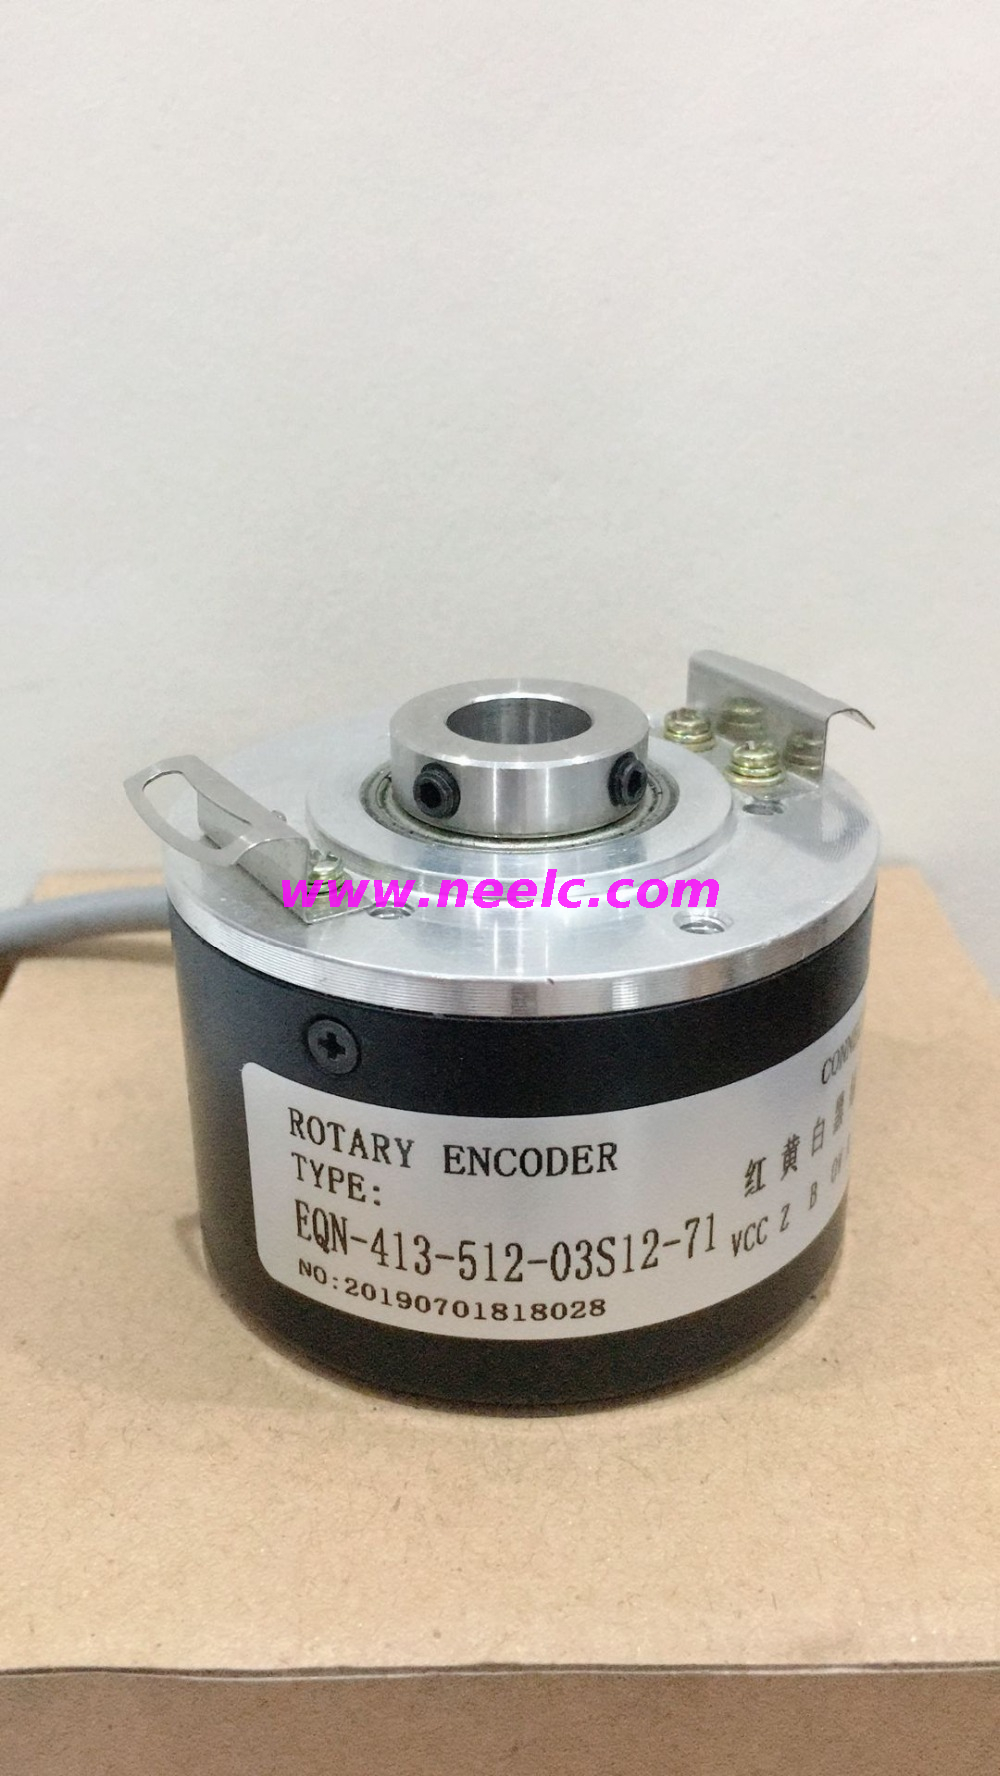 EQN-413-512-03S12-71 new and 100% Compatible encoder